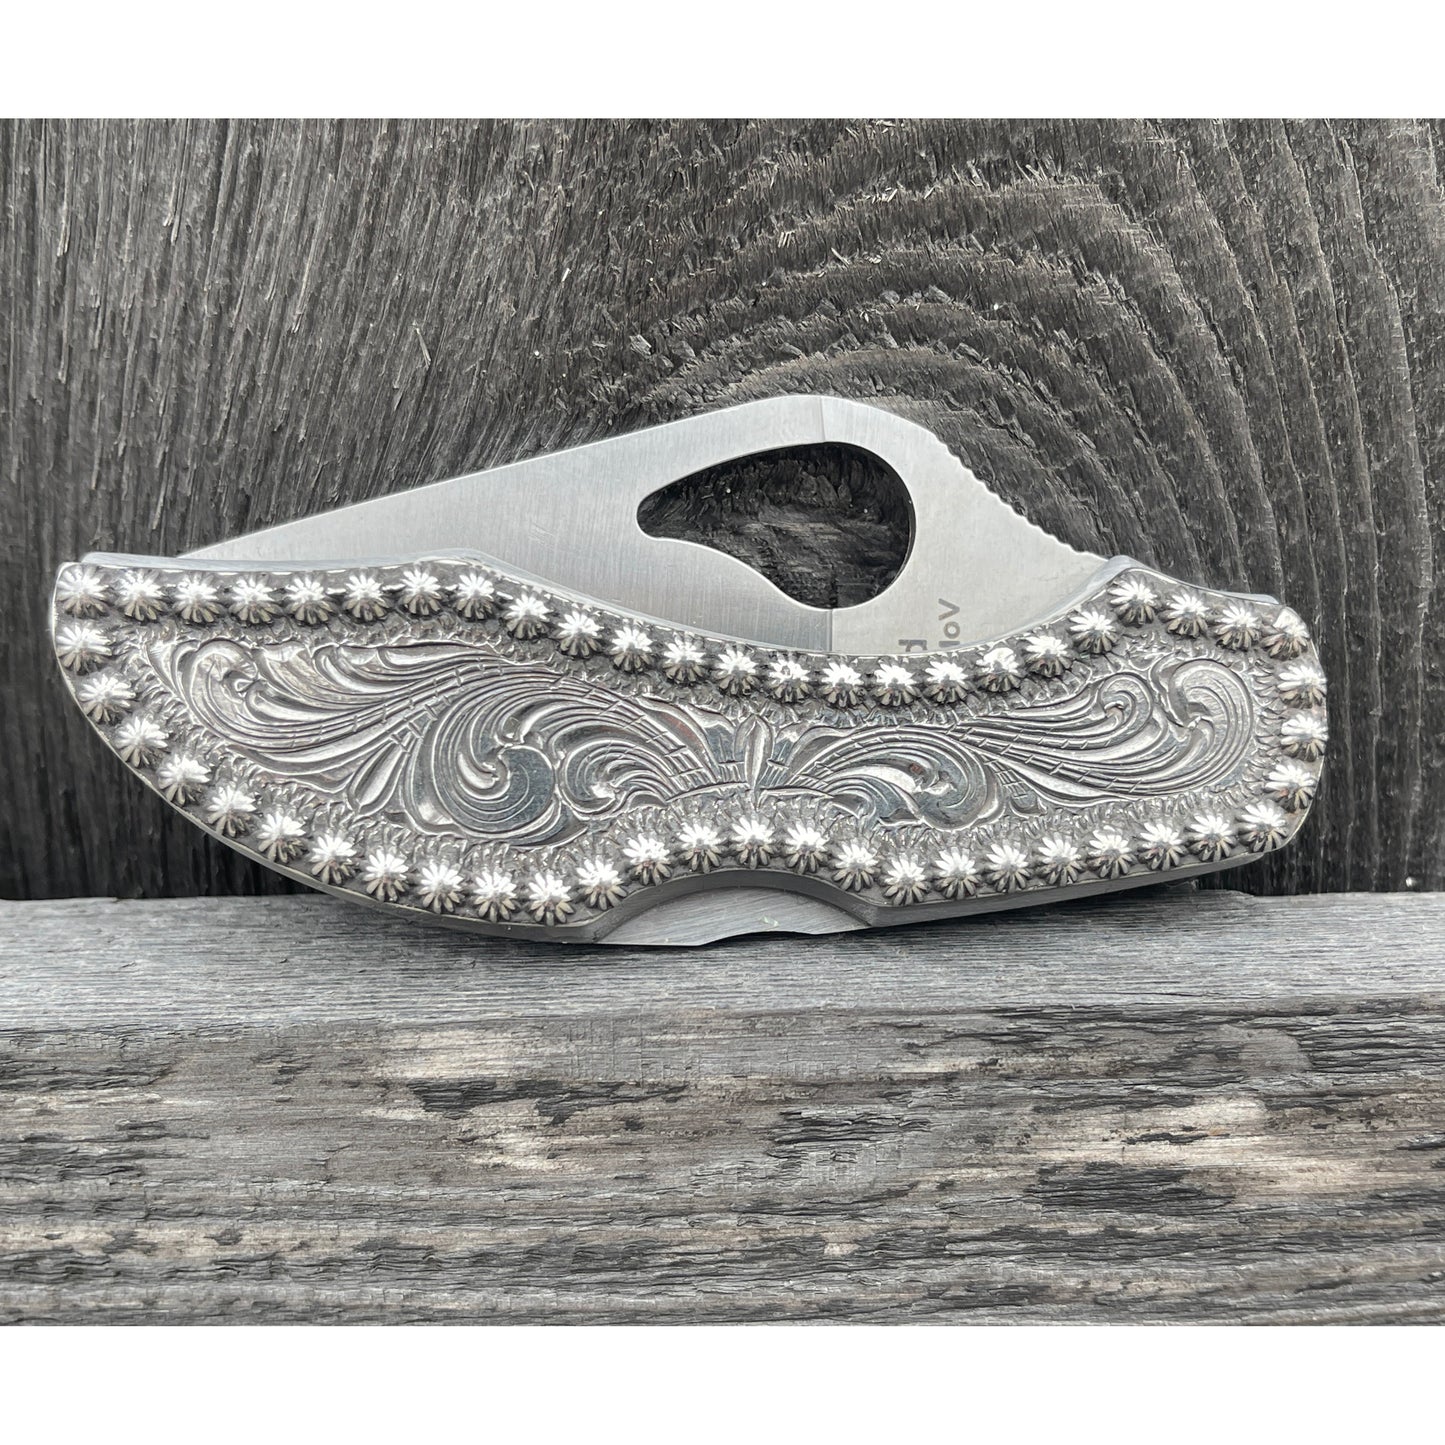 Sterling silver Byrd knife with custom hand engraving surrounded by a beaded border.